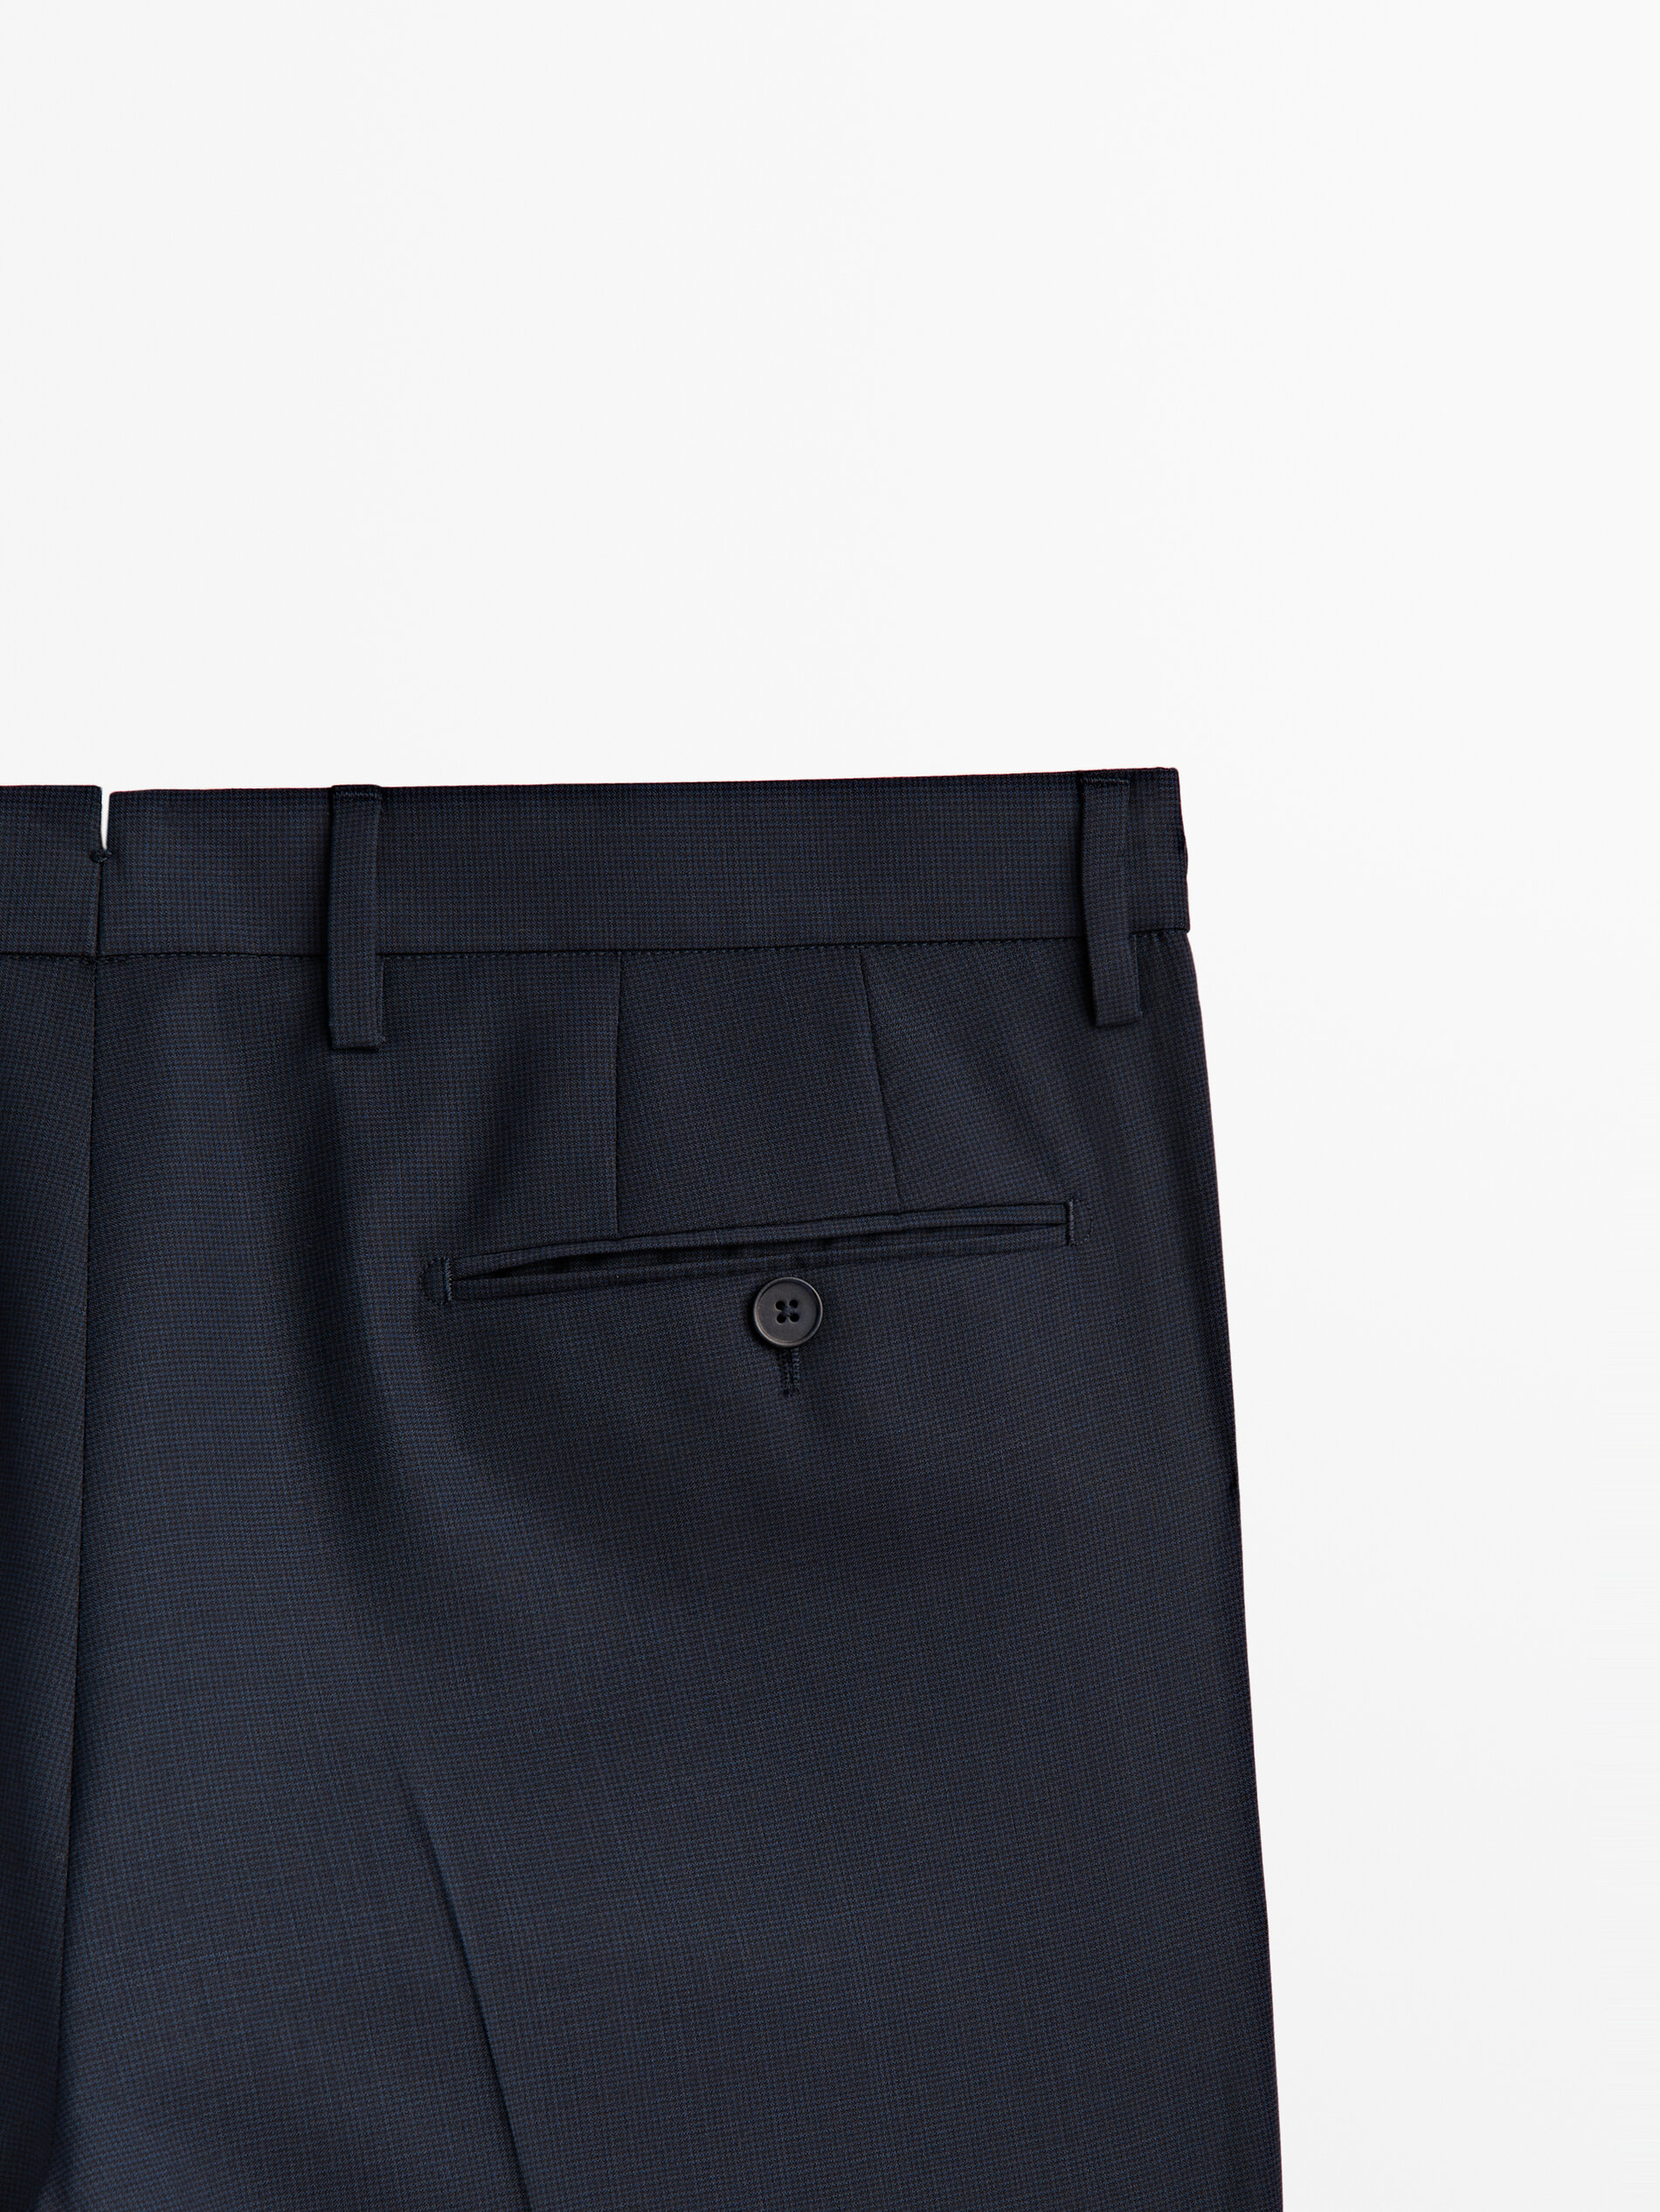 Zegna Pure Wool Trousers in Gray for Men  Lyst